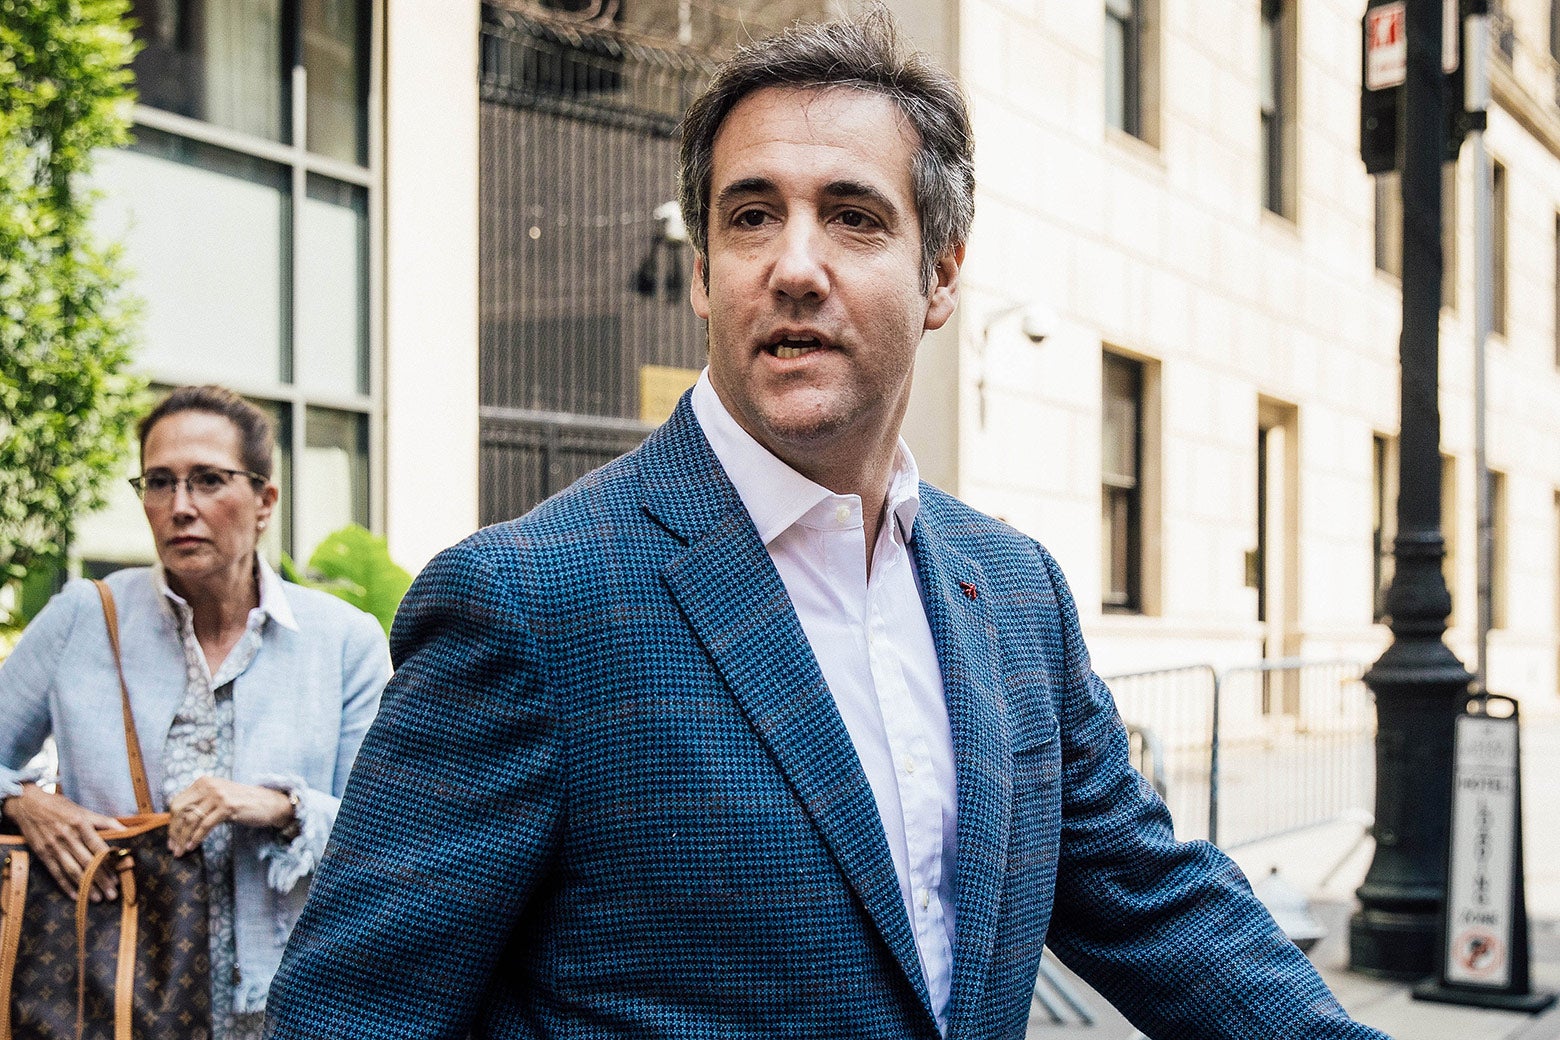 Michael Cohen exits a hotel in New York.